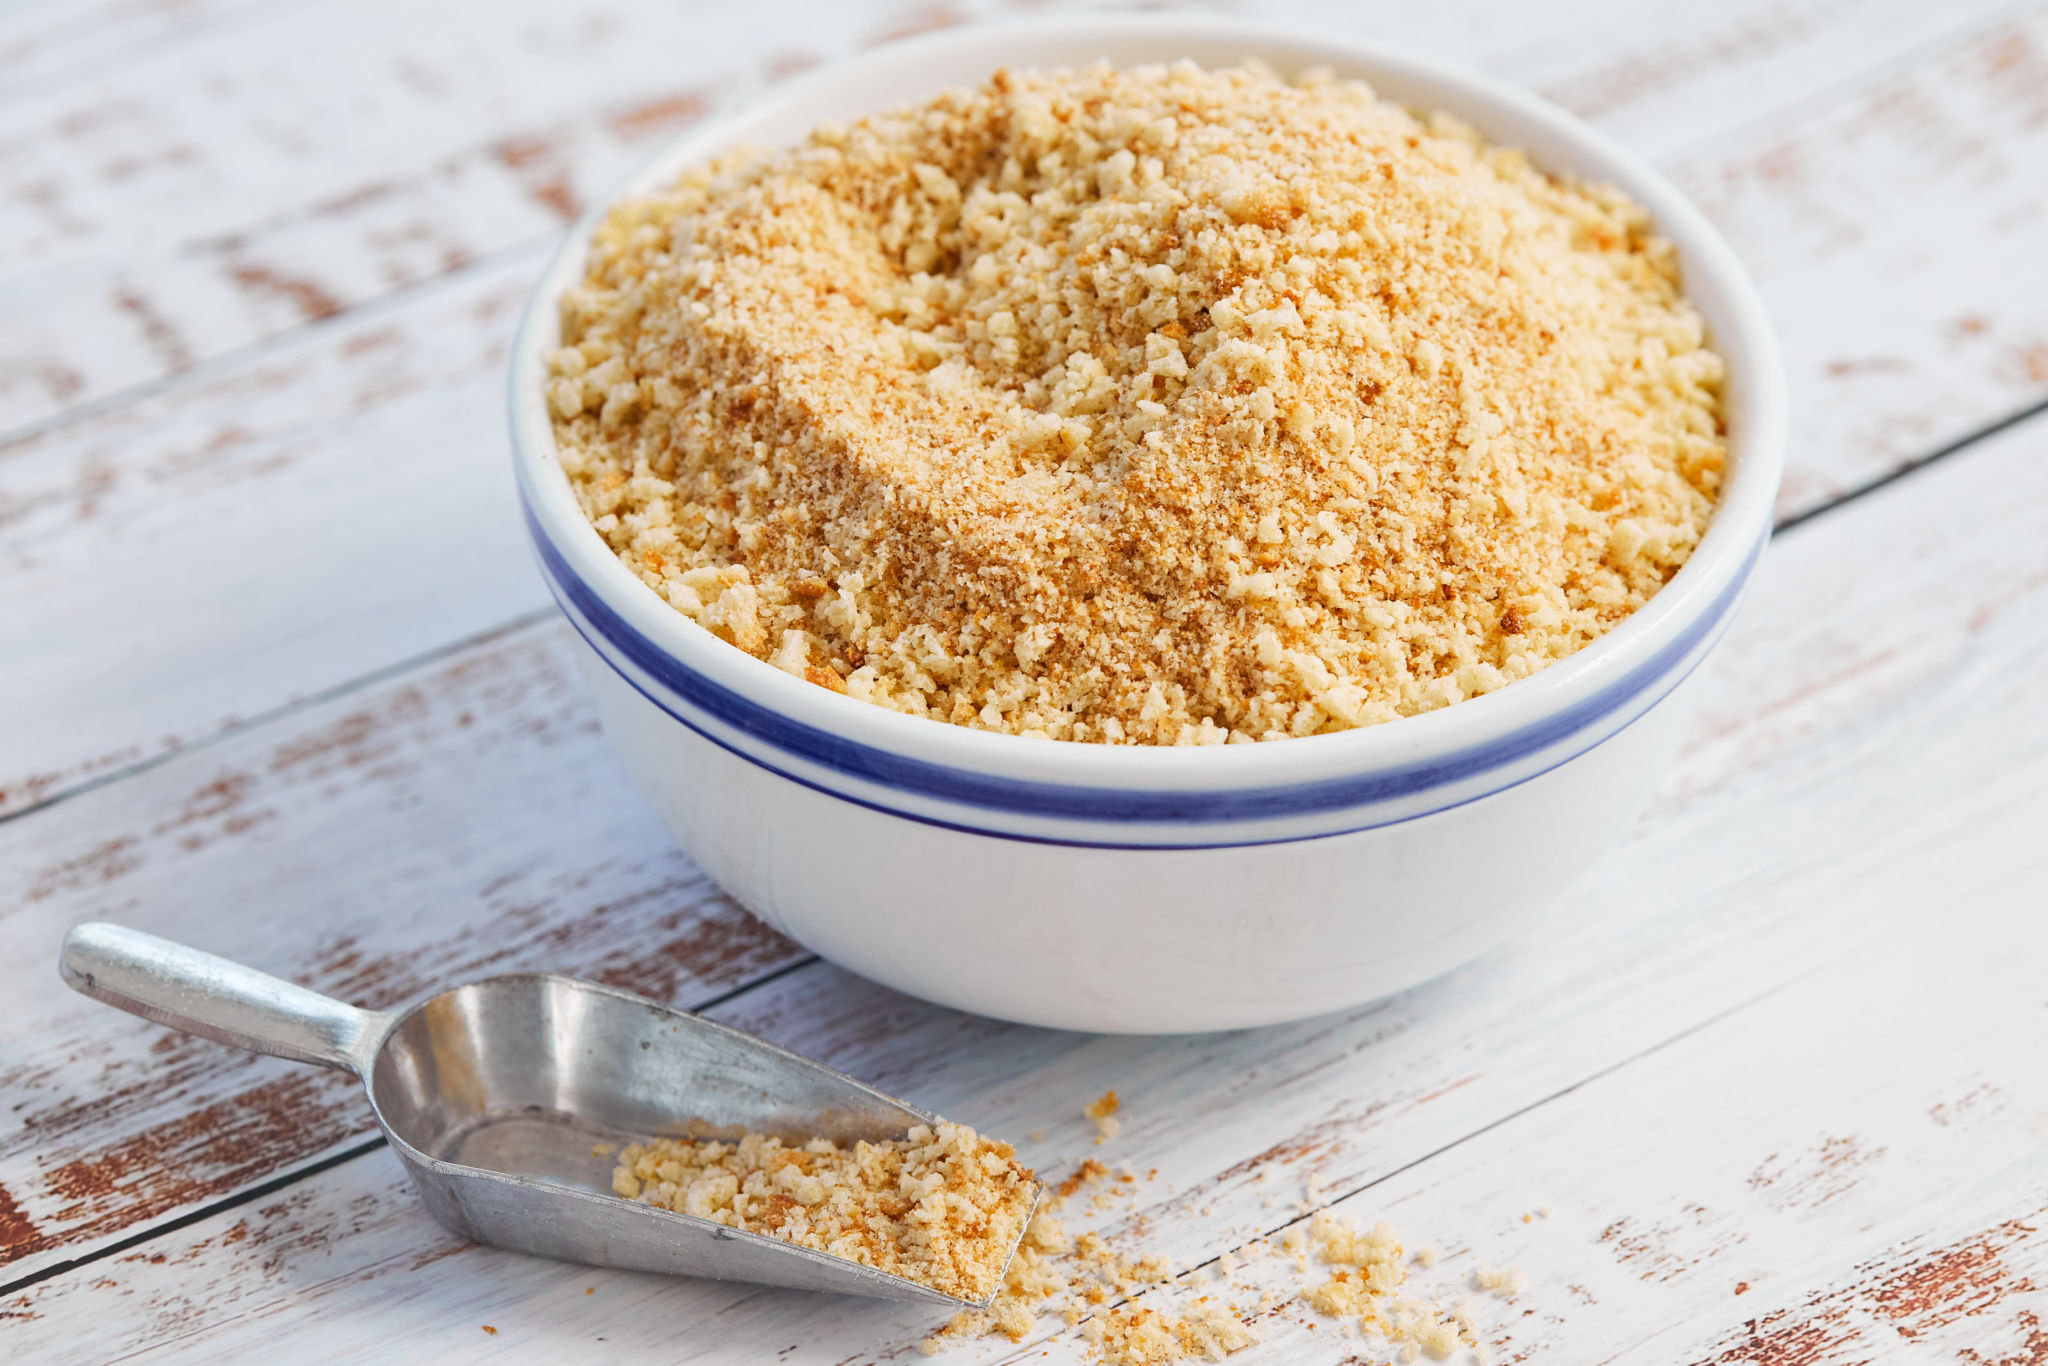 A bowl of breadcrumbs with a scoop.